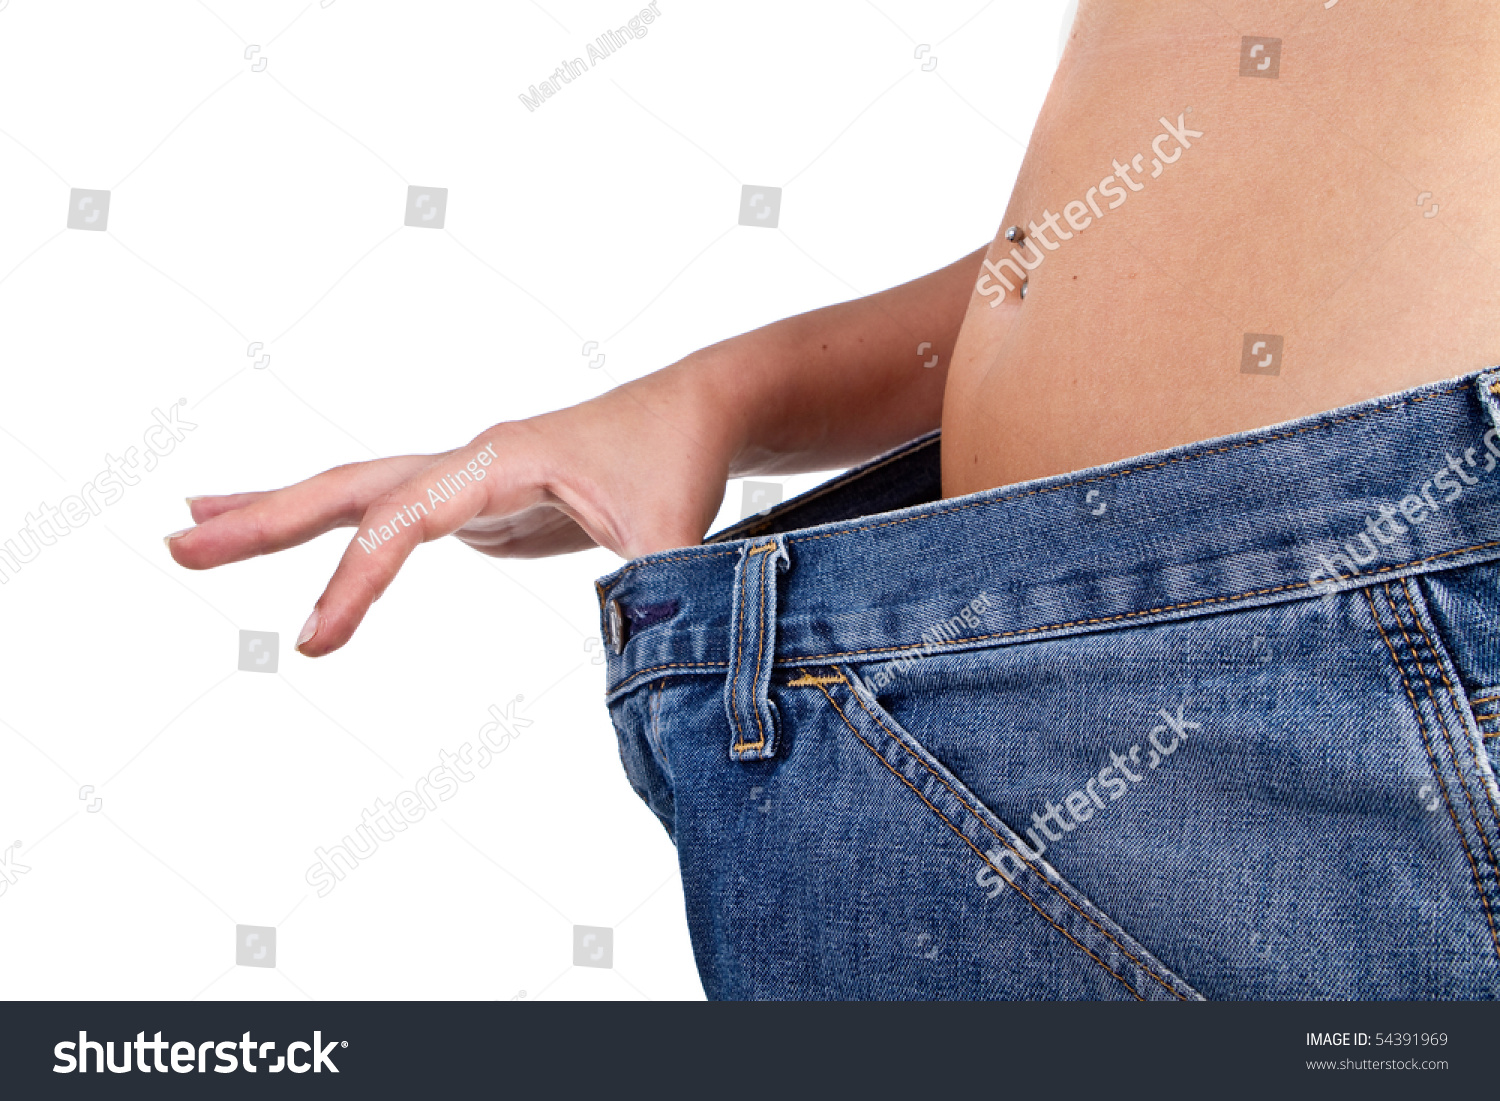 Female Model showing her lost weight by putting on an older jean. #54391969